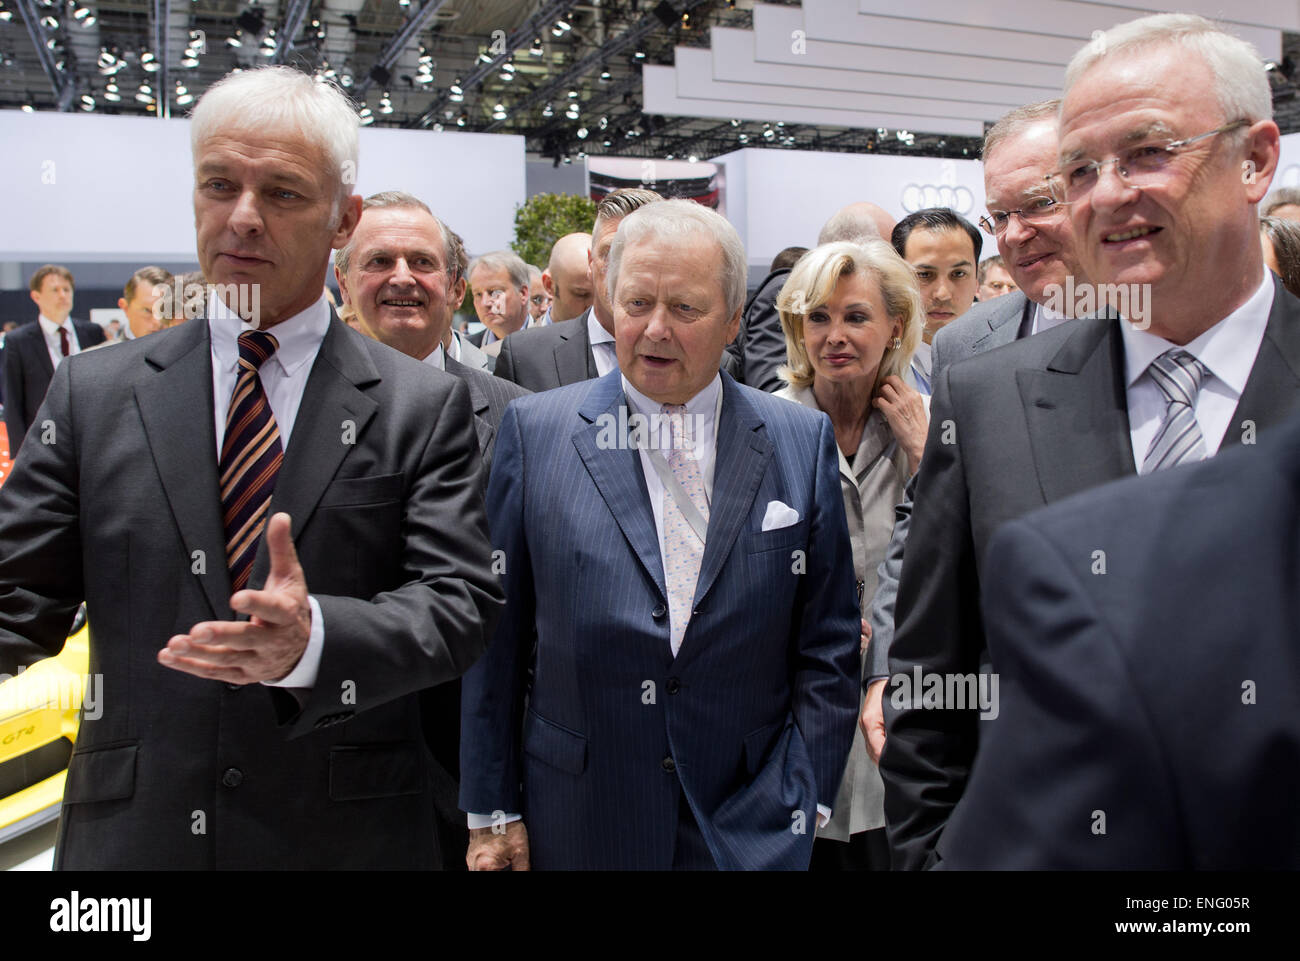 Hanover, Germany. 05th May, 2015. Matthias Mueller (L-R), CEO of Porsche AG, Hans Michel Piech and Wolfgang Porsche, members of the Supervisory Board at Volkswagen AG, Porsche's partner Daniela Huebner, Stephan Weil, Minister President of Lower Saxony and member of the supervisory board at Volkswagen AG, and Martin Winterkorn, CEO of Volkswagen AG, stand at the Volkswagen AG shareholders' meeting at the fairground in Hanover, Germany, 05 May 2015. Photo: JULIAN STRATENSCHULTE/dpa/Alamy Live News Stock Photo